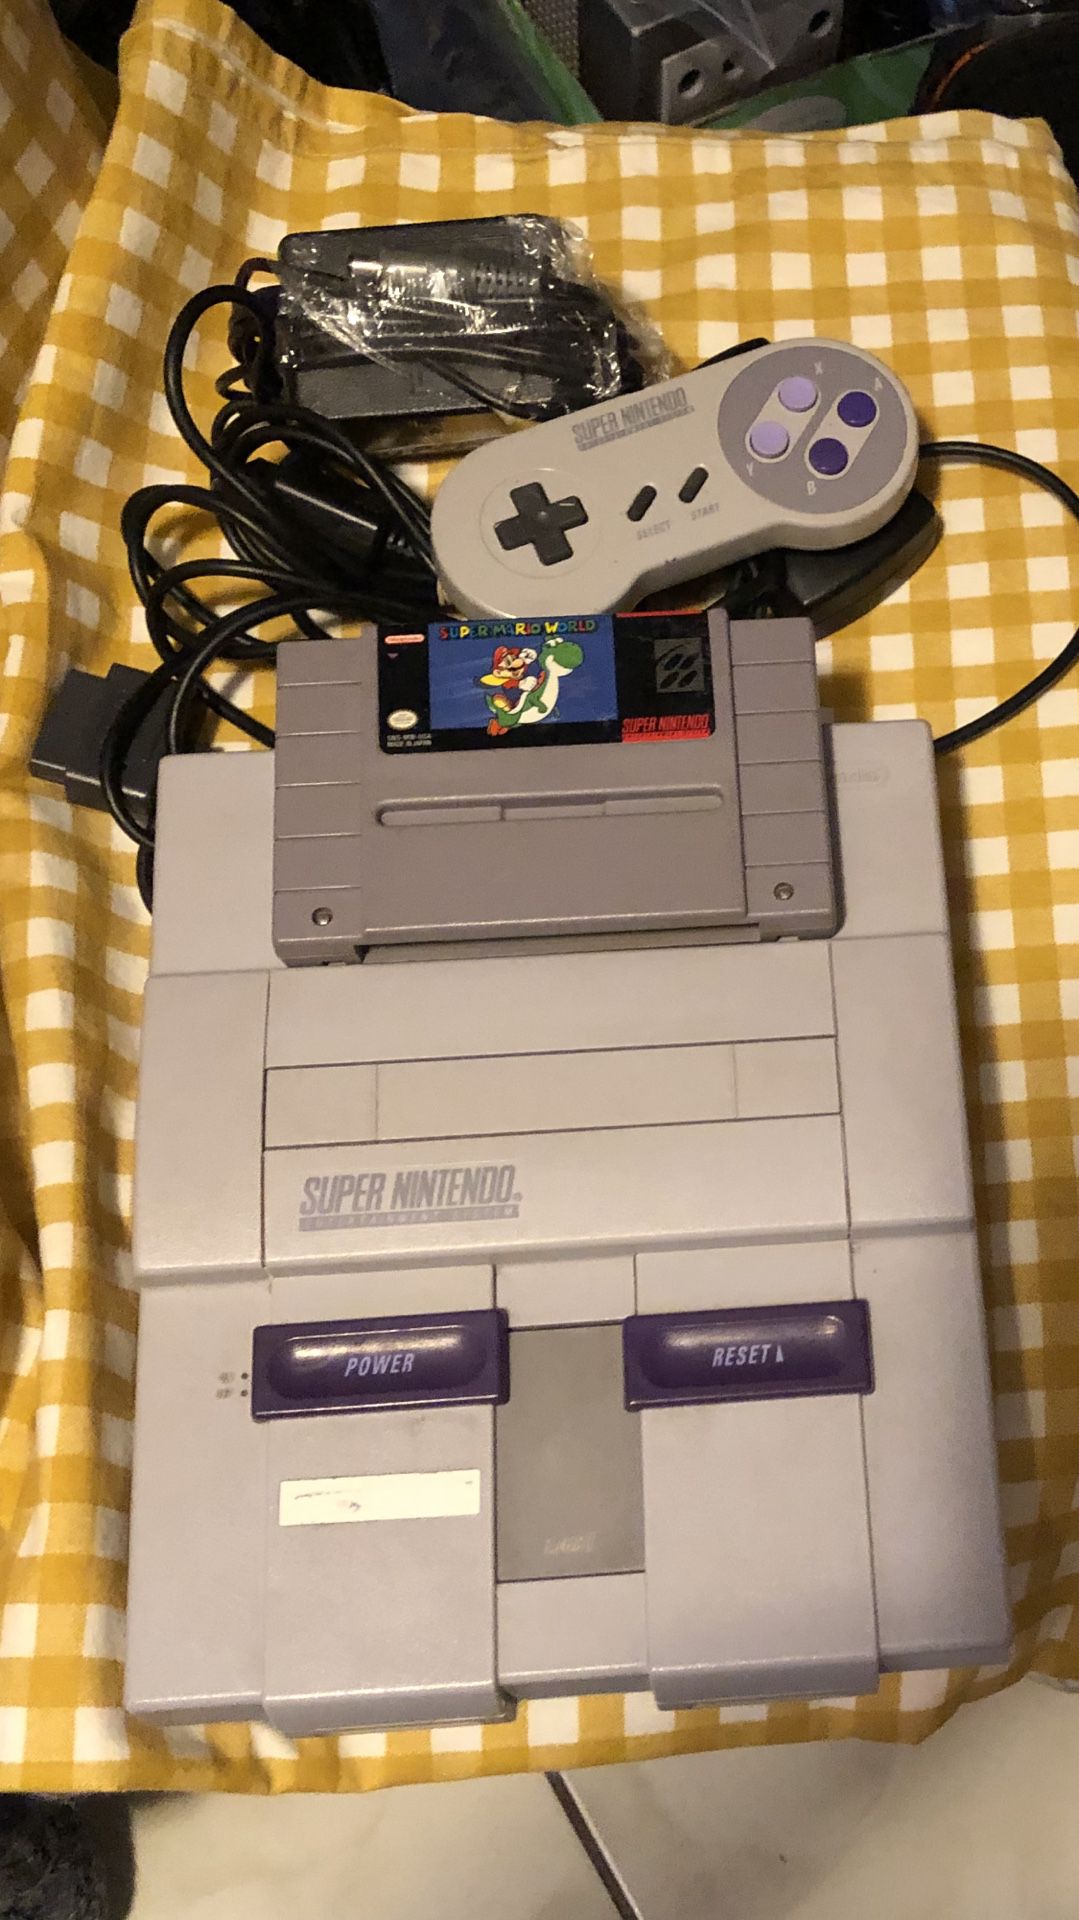 Super Nintendo complete with 1 game